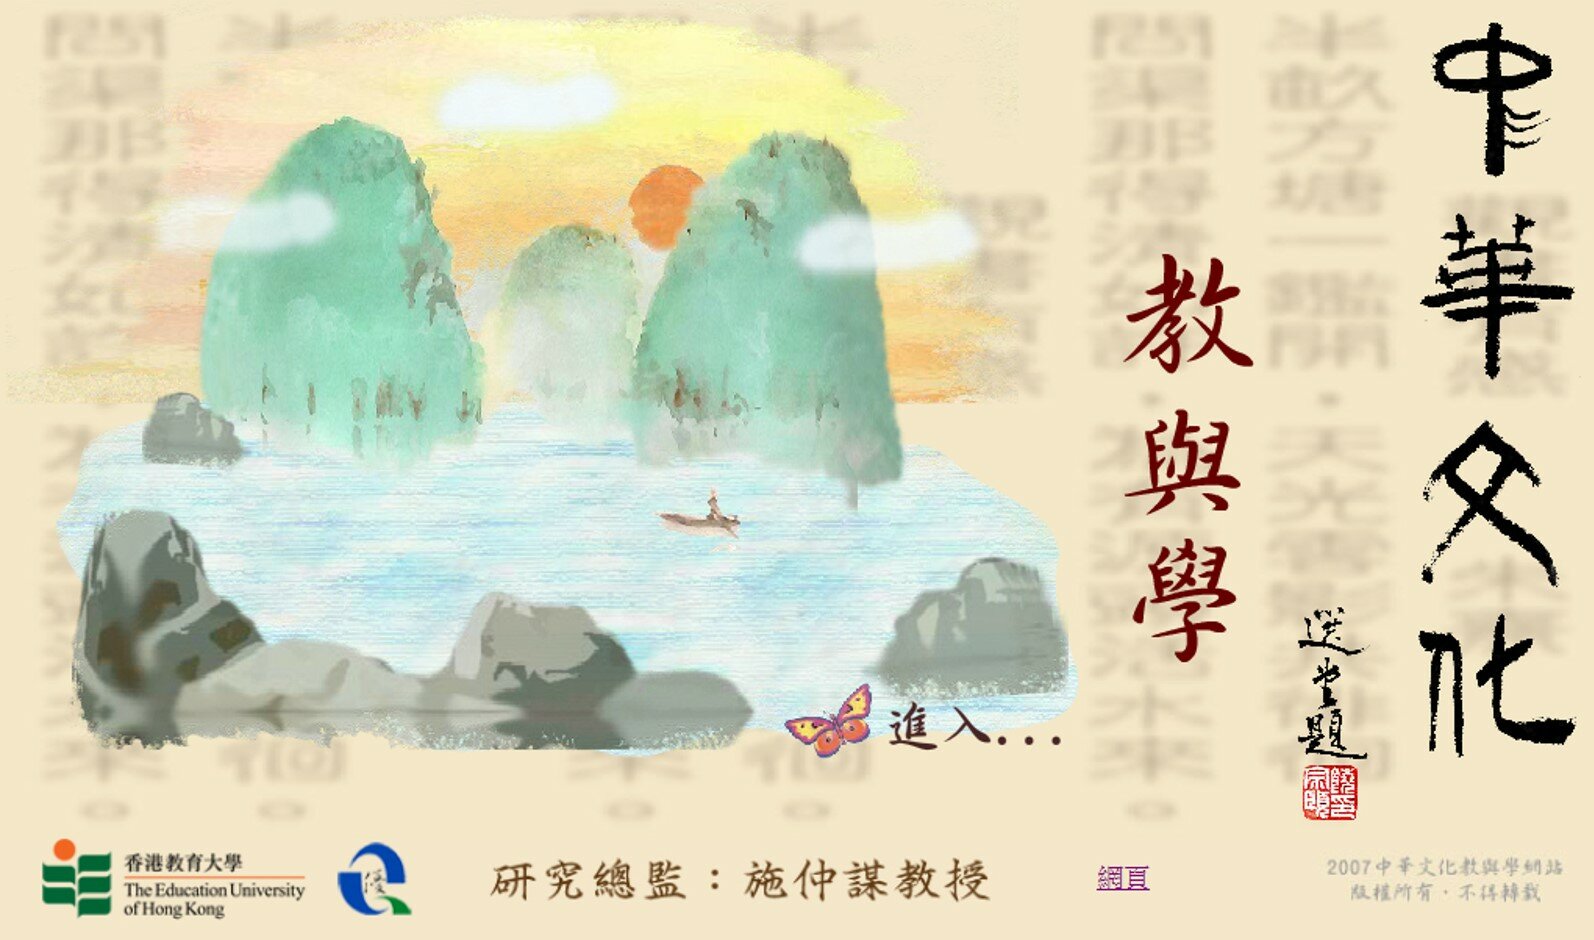 The Learning and Teaching of Chinese Culture Website